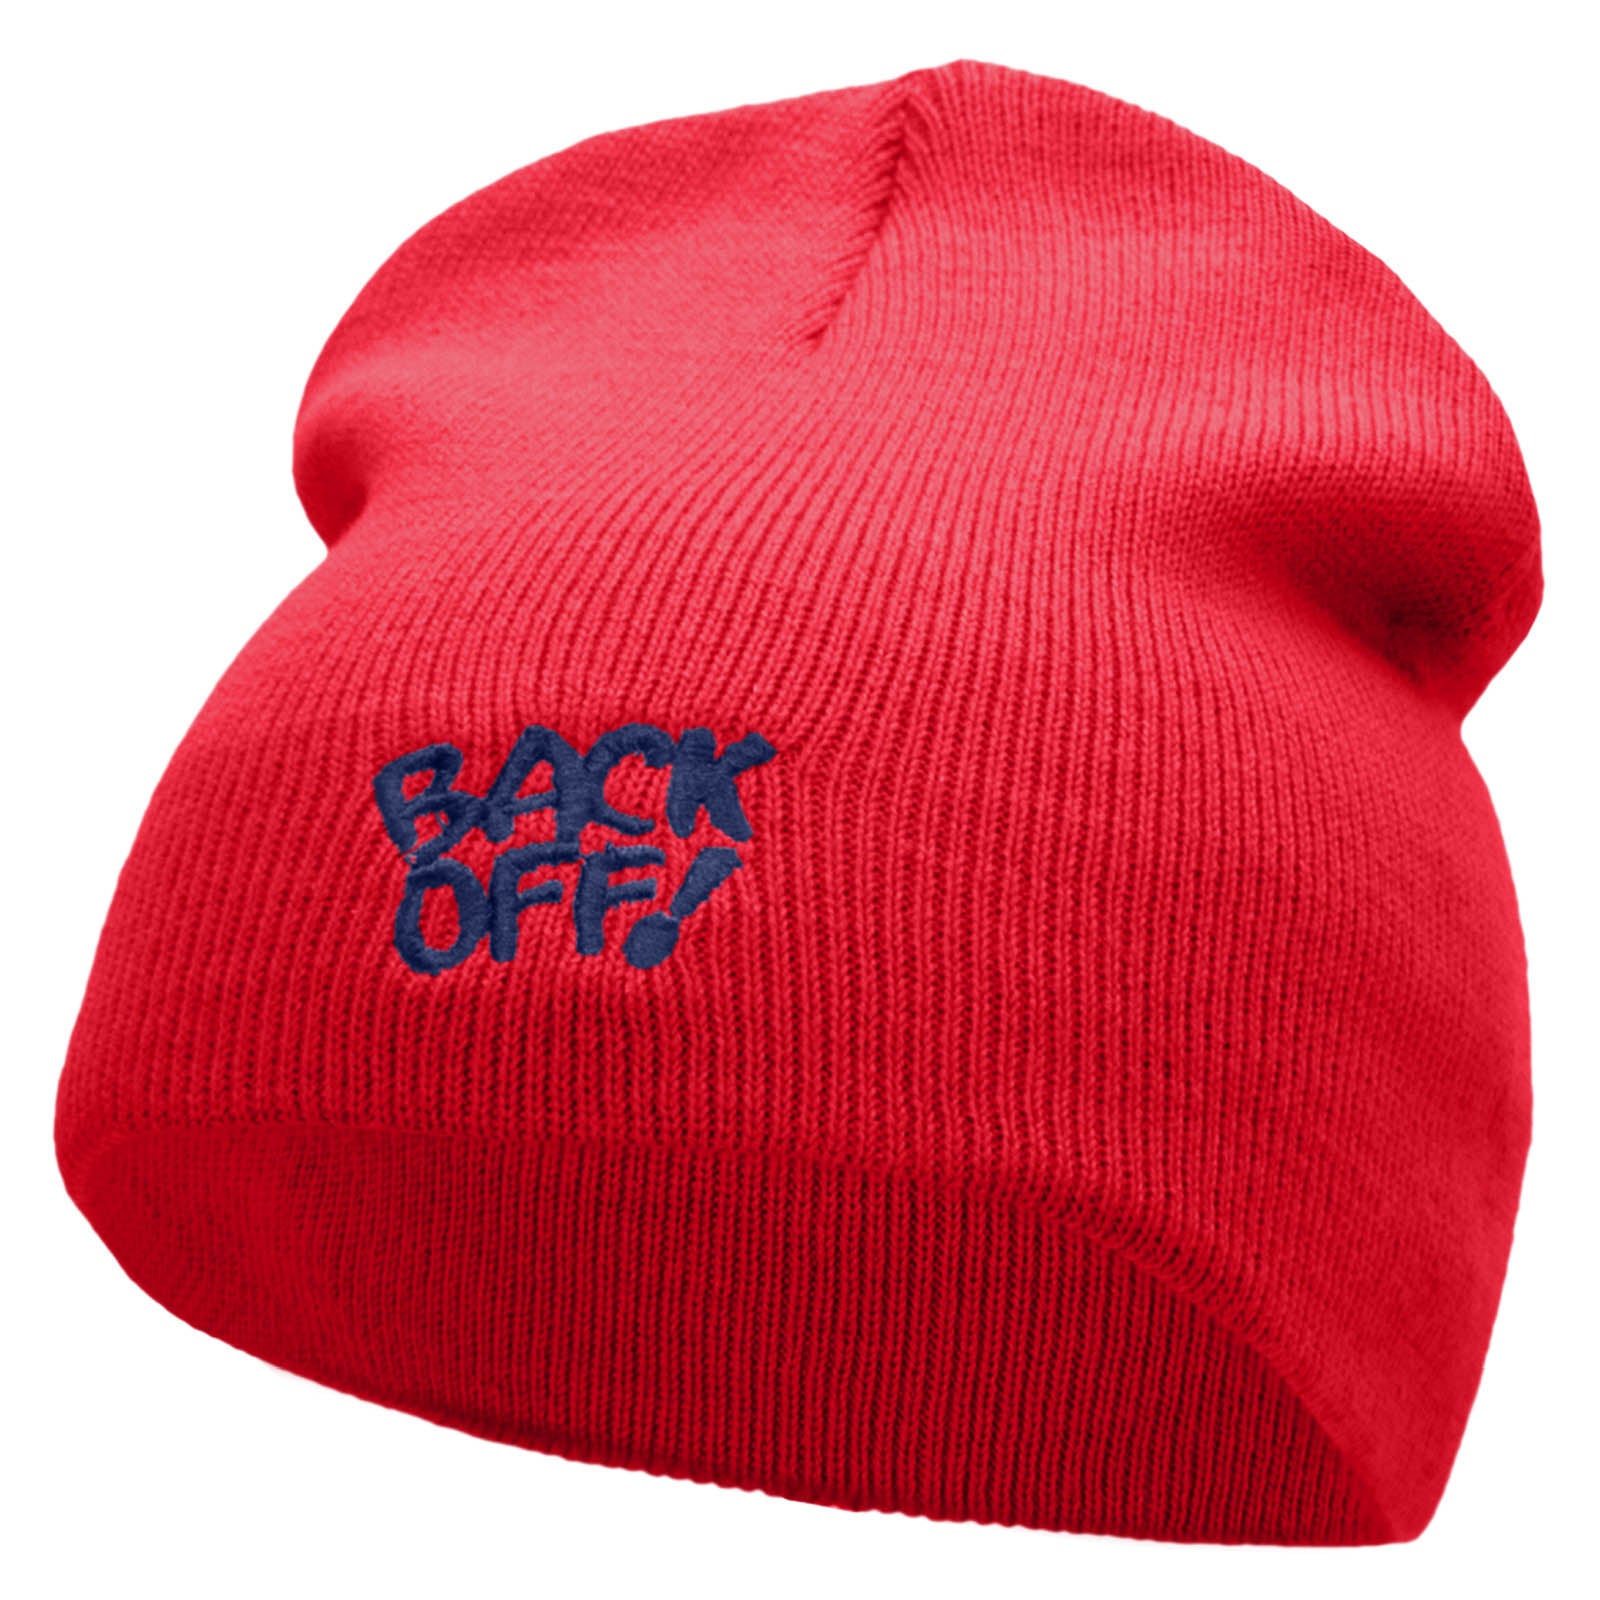 Back Off Saying Embroidered Short Beanie - Red OSFM